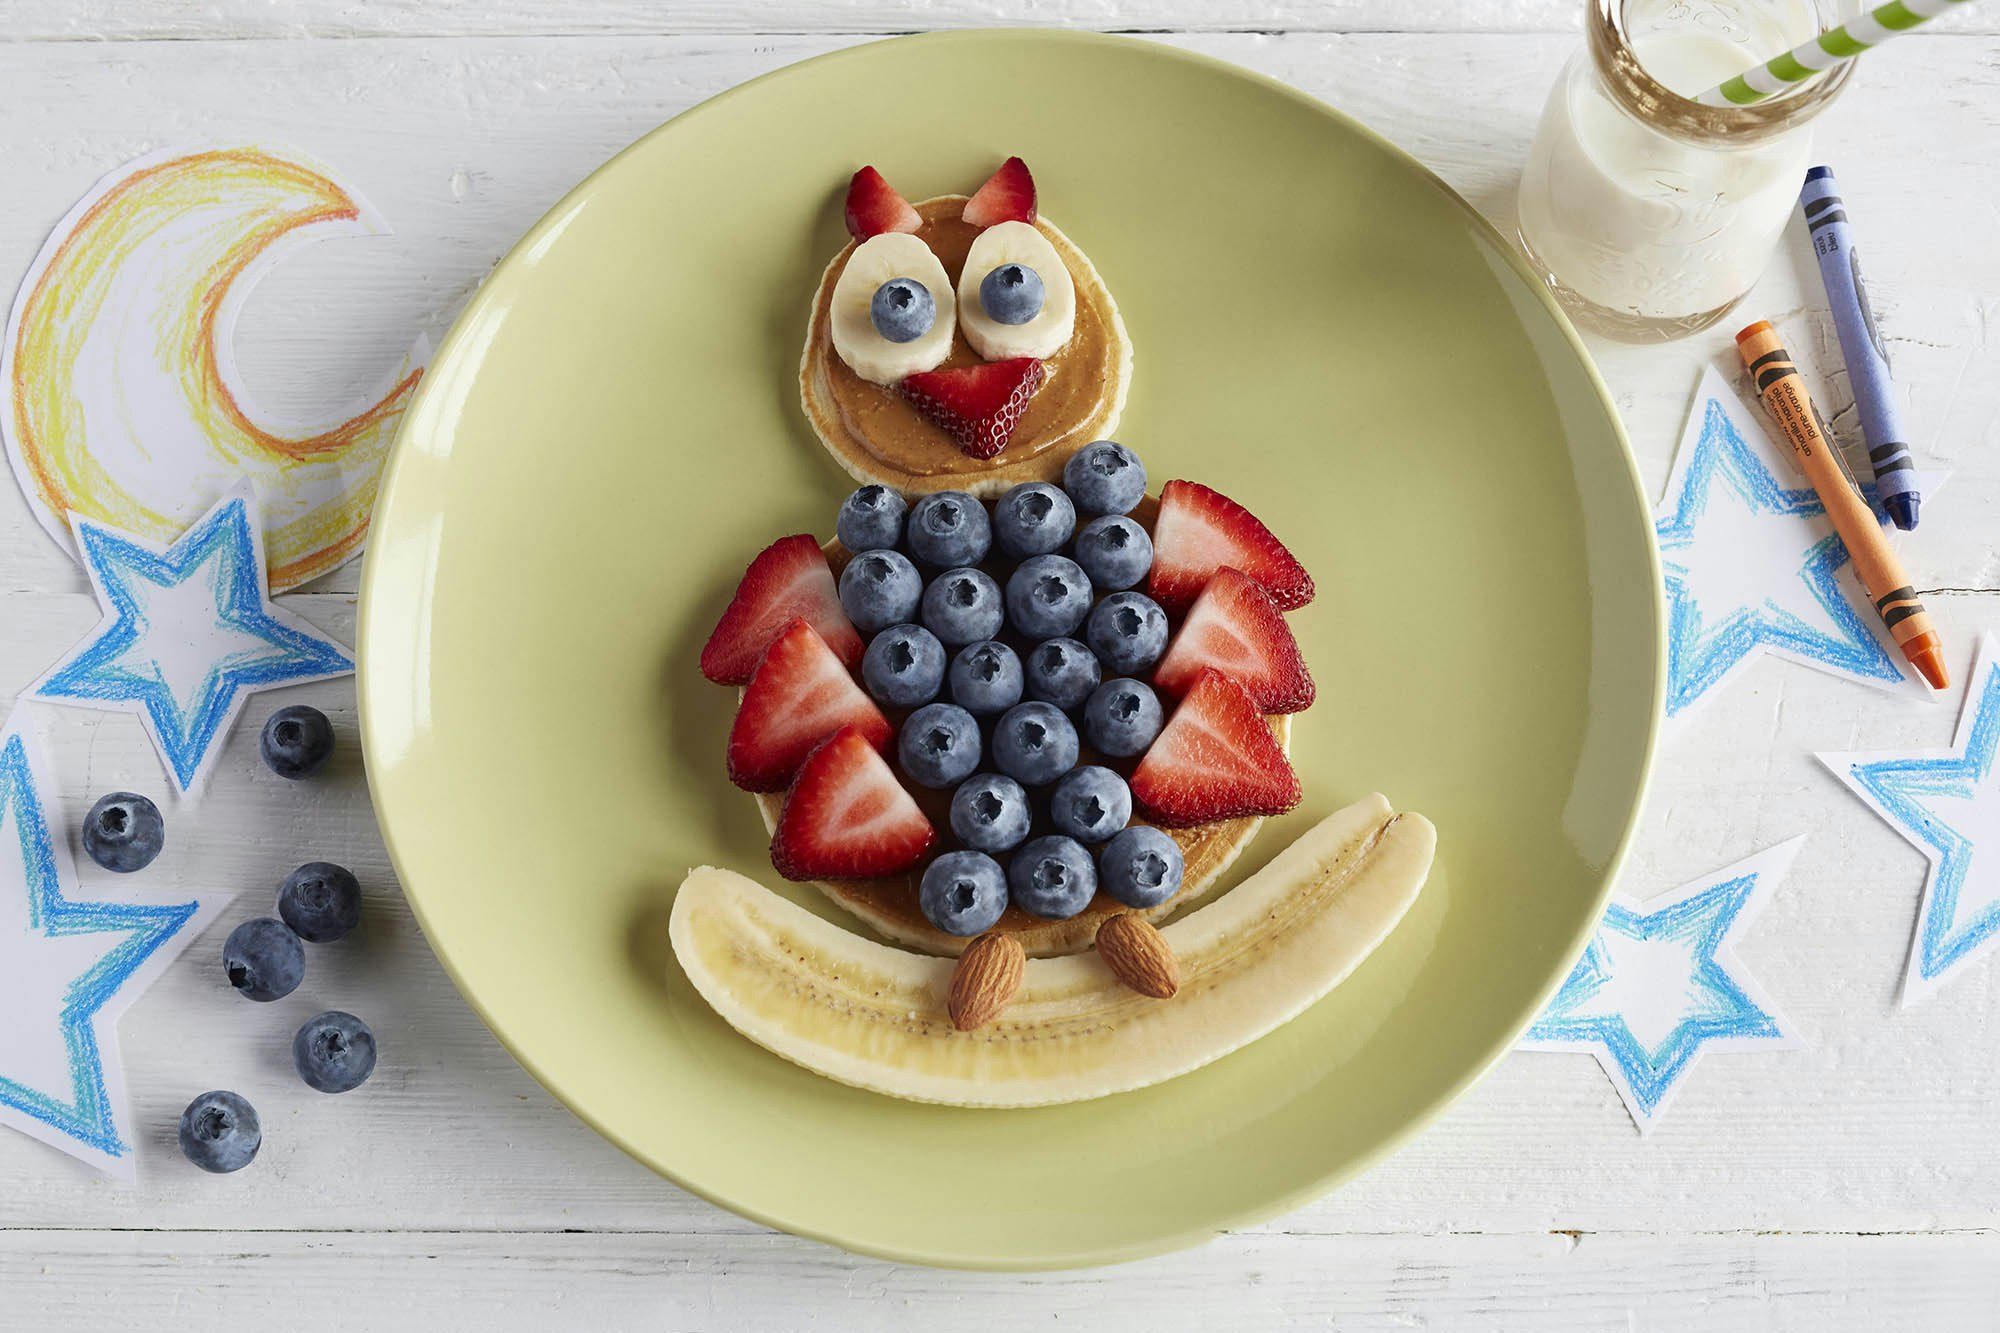 A plate of pancakes and berries in the shape of an owl